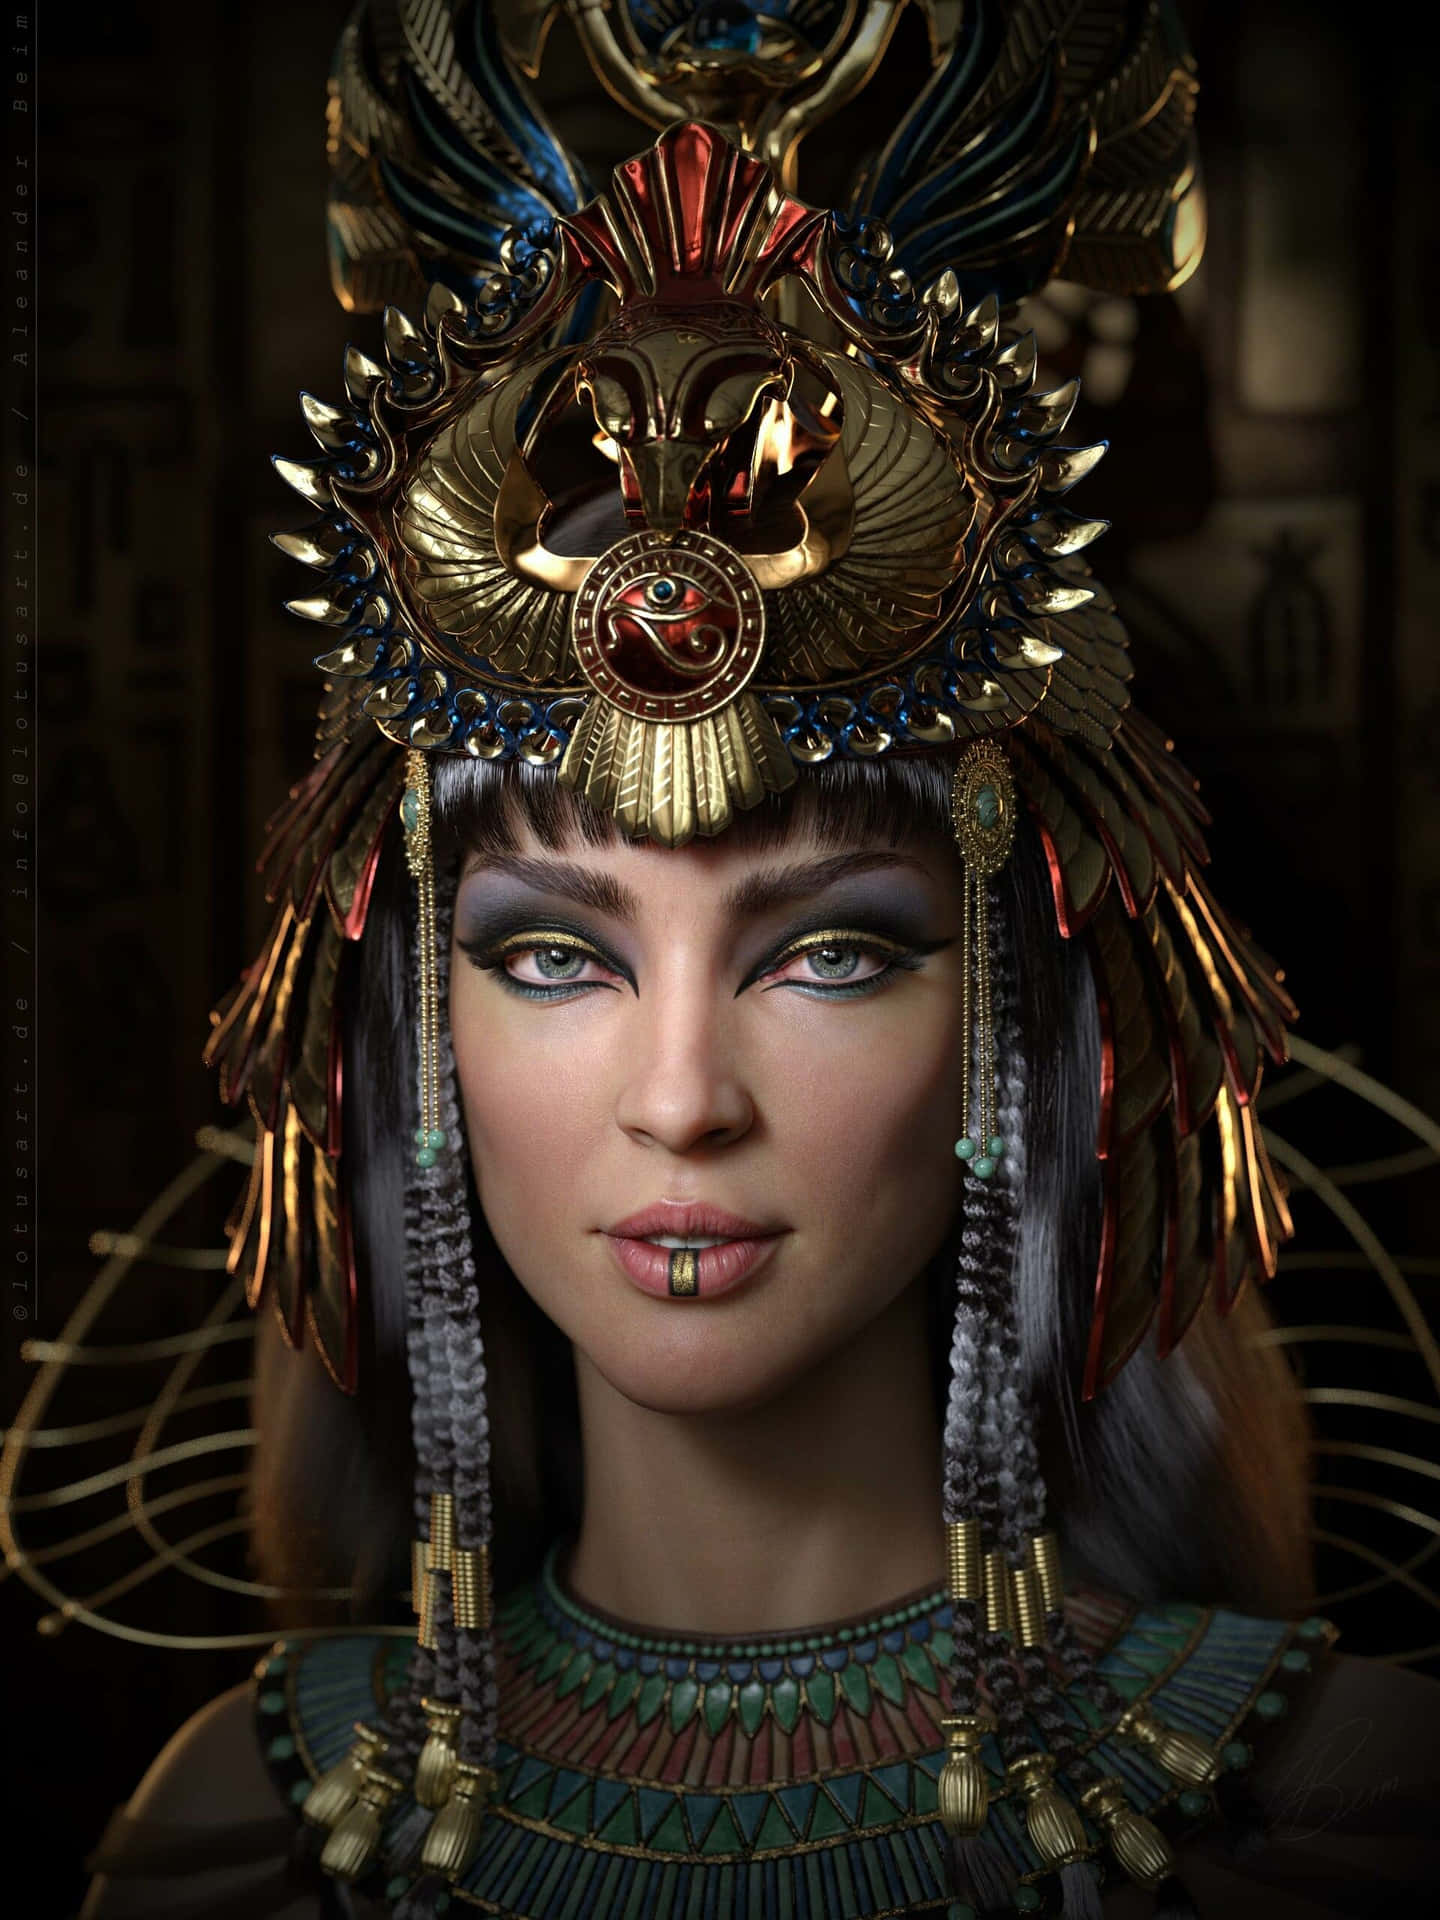 The Legendary Queen of the Nile - Cleopatra